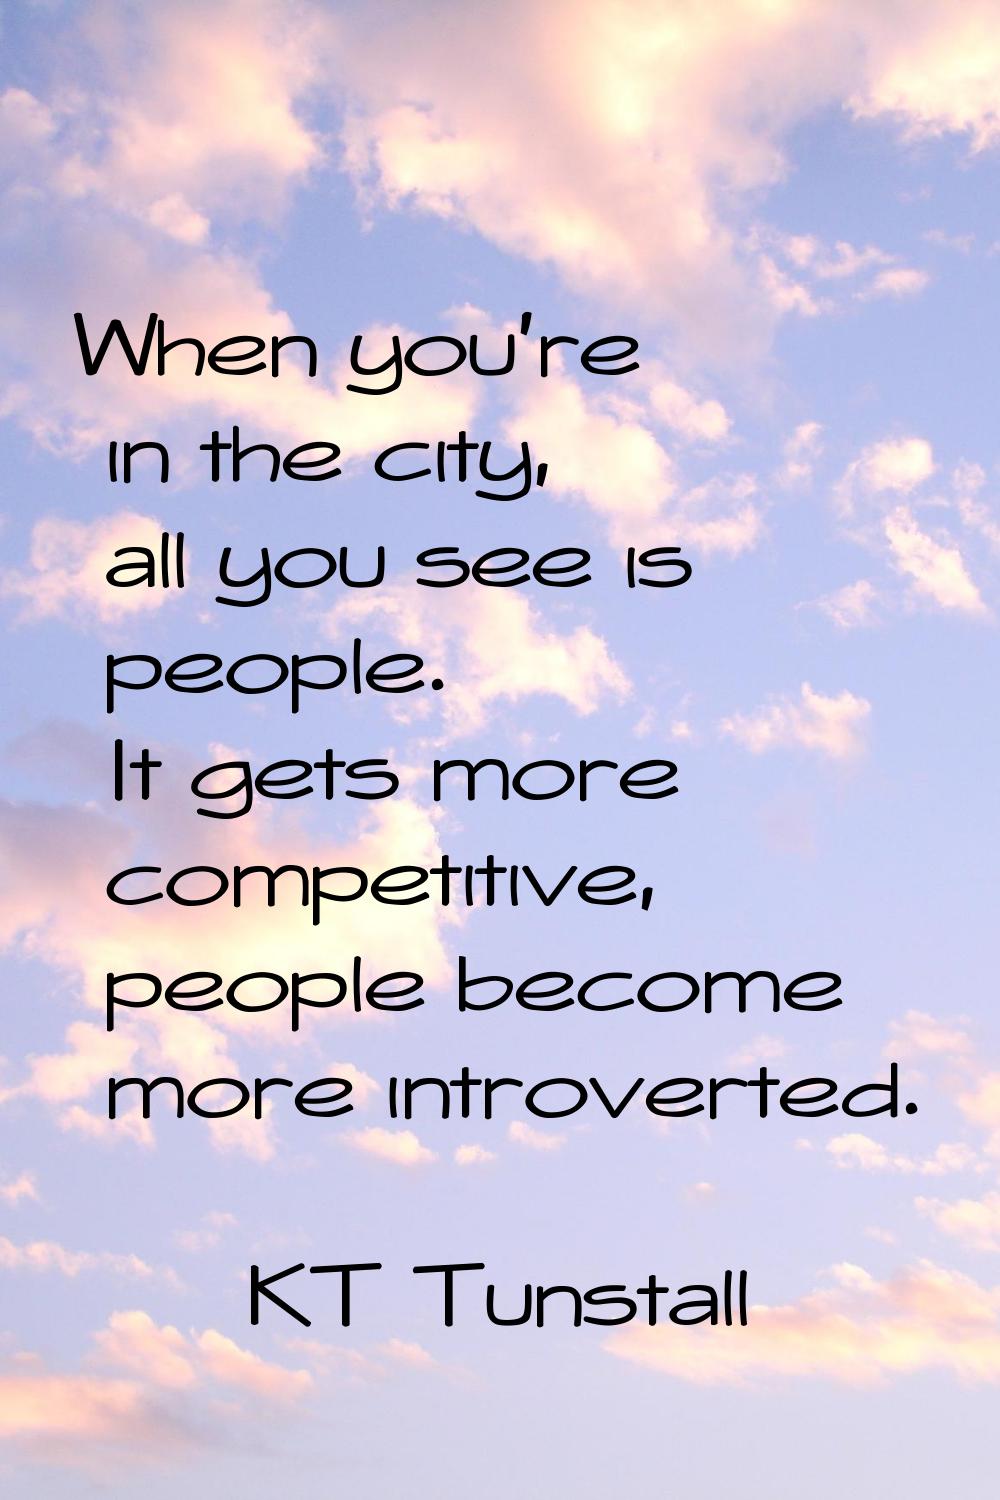 When you're in the city, all you see is people. It gets more competitive, people become more introv